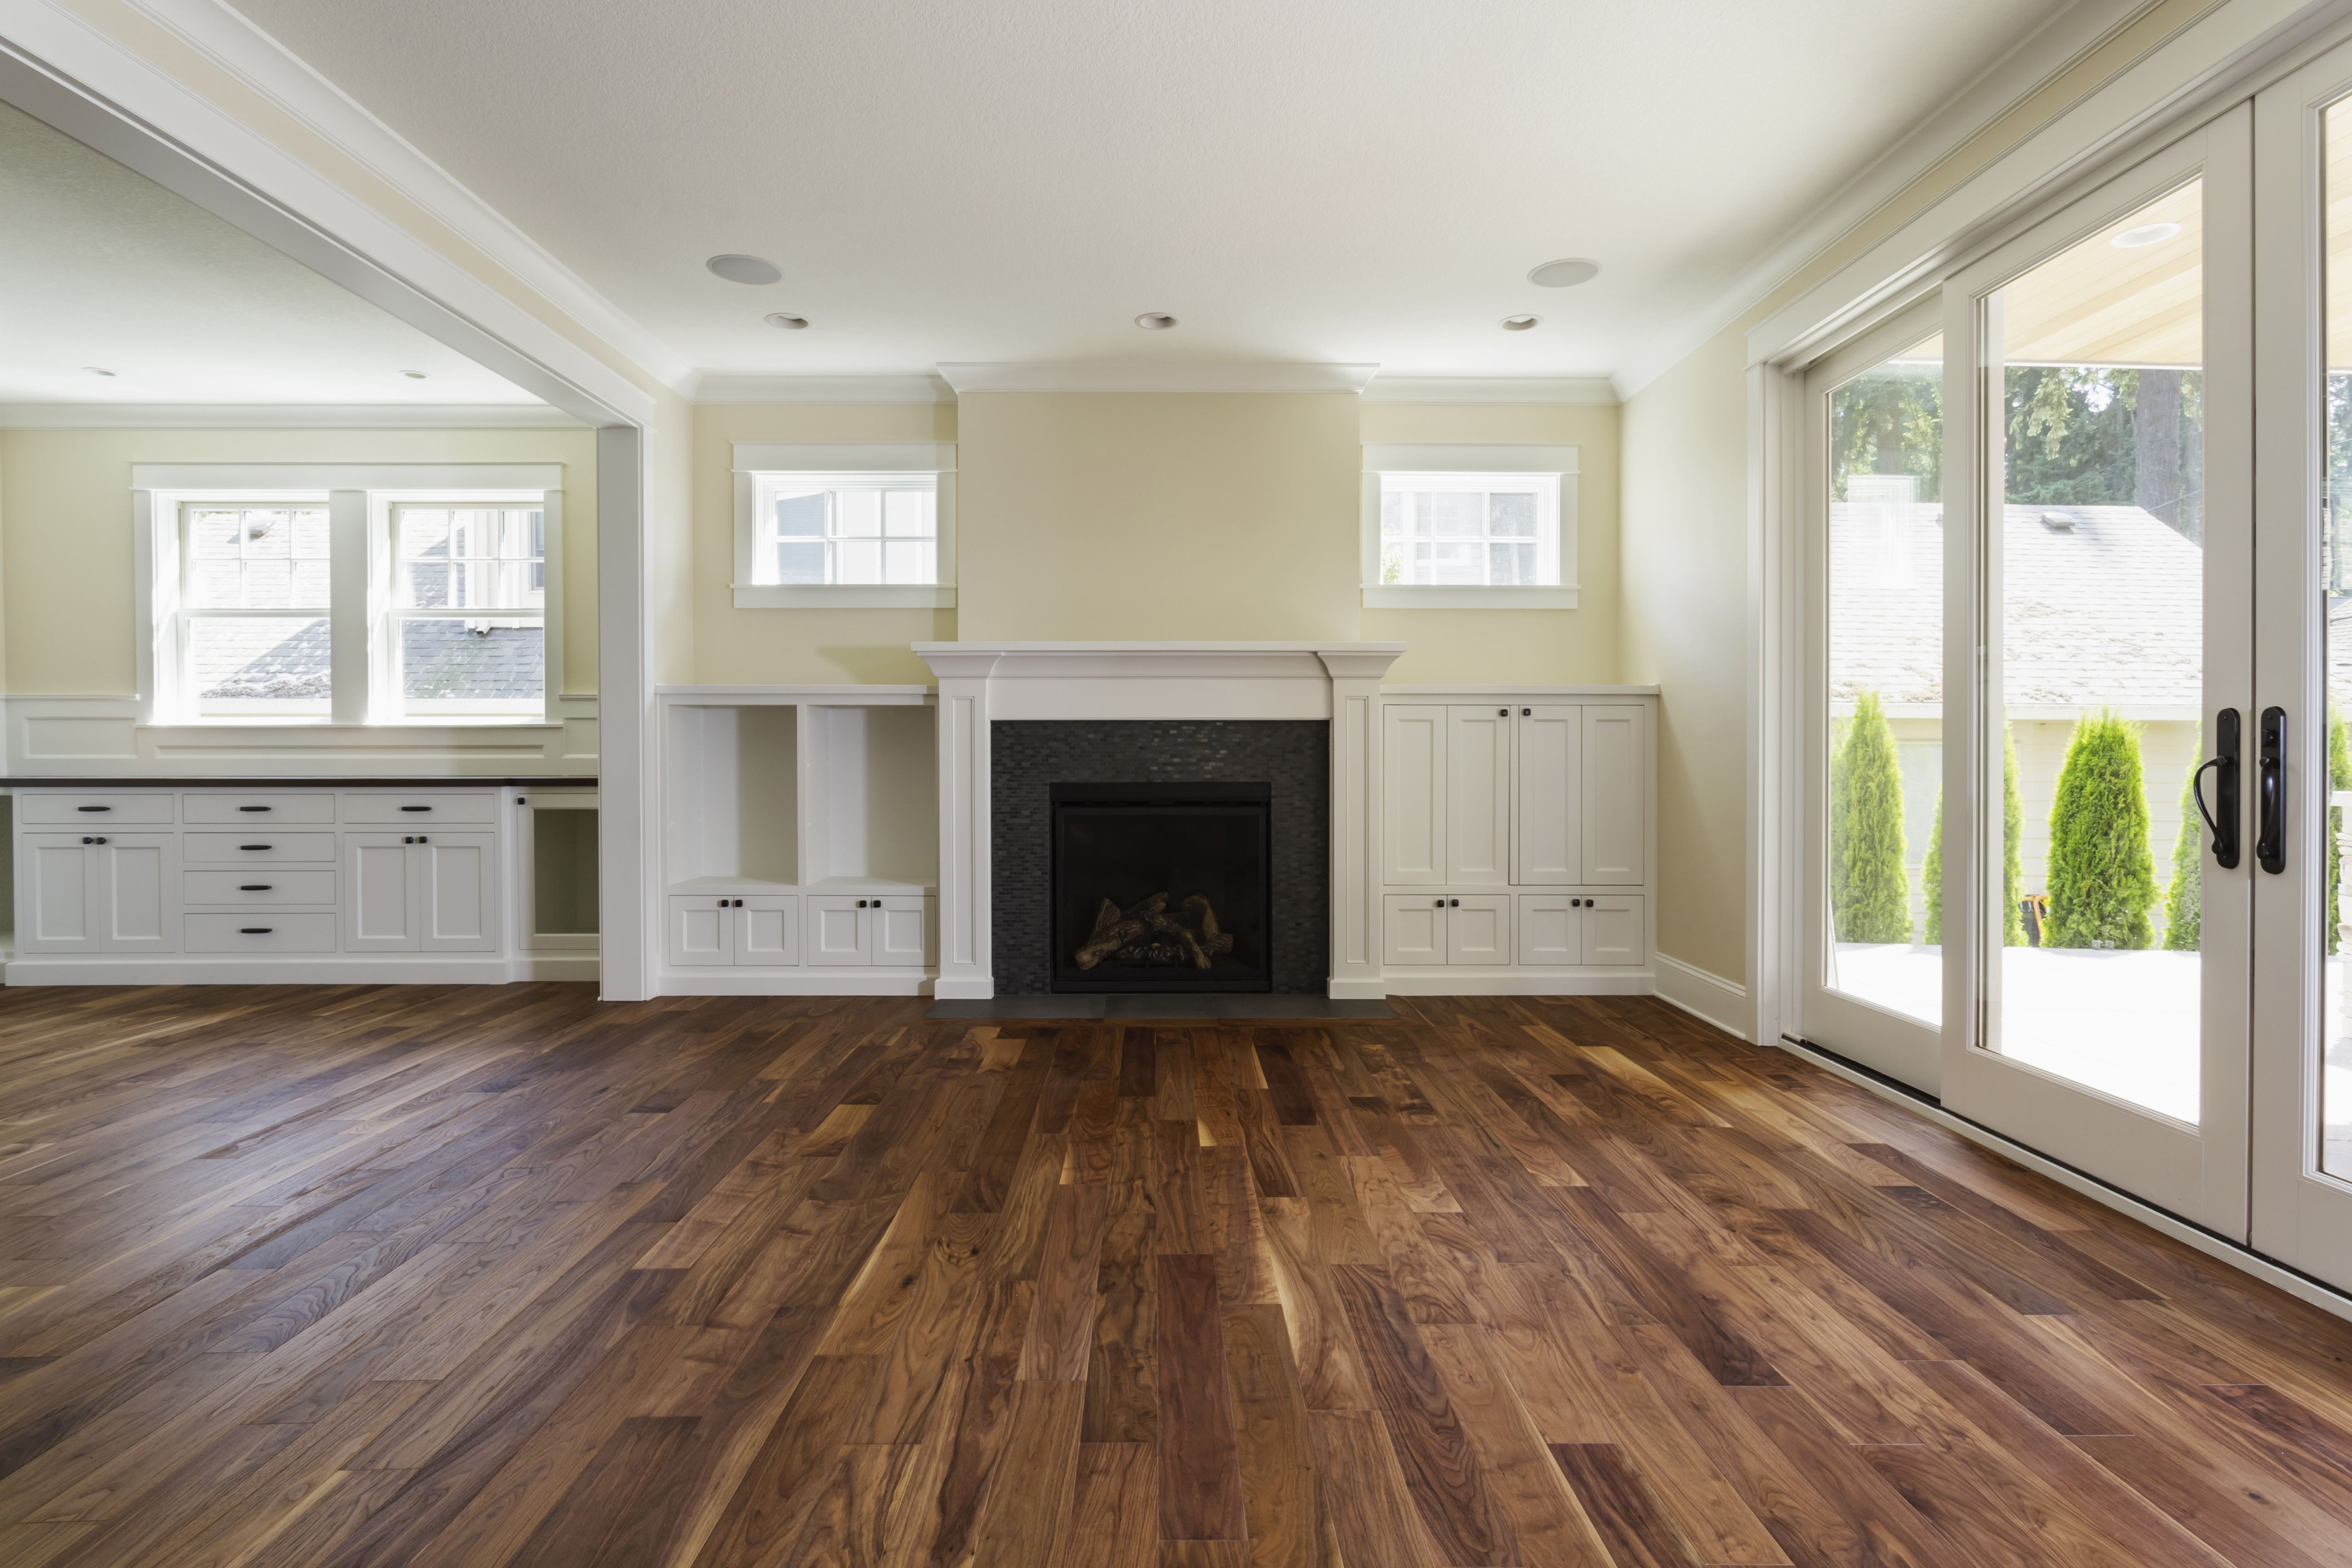 Bruce American Vintage Hardwood Flooring Of the Pros and Cons Of Prefinished Hardwood Flooring for Fireplace and Built In Shelves In Living Room 482143011 57bef8e33df78cc16e035397